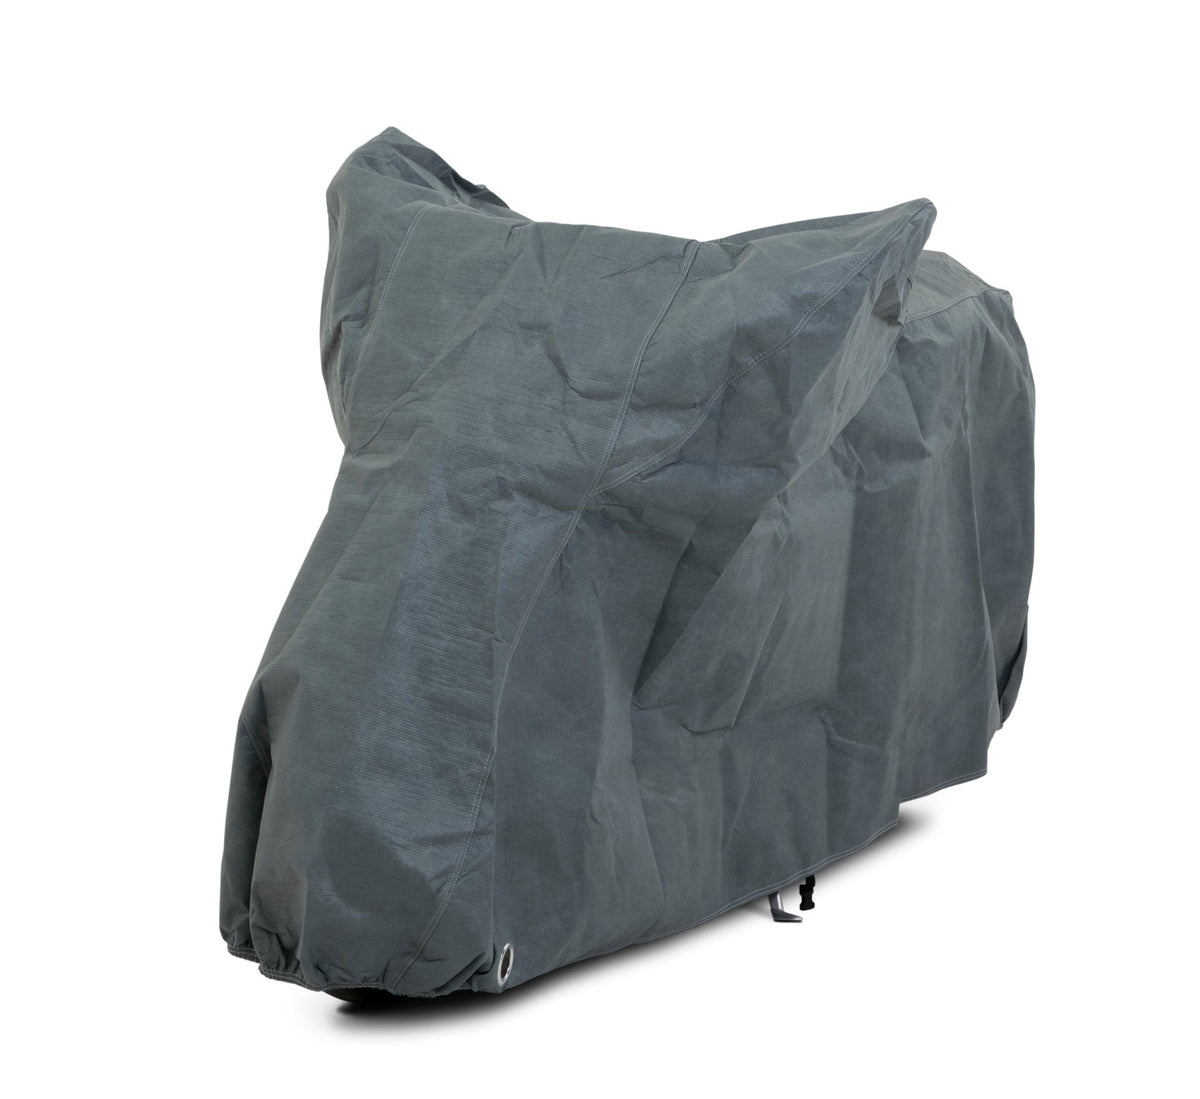 Stormforce best outdoor motorcycle covers for PIAGGIO/VESPA - Storm Motorcycle Covers